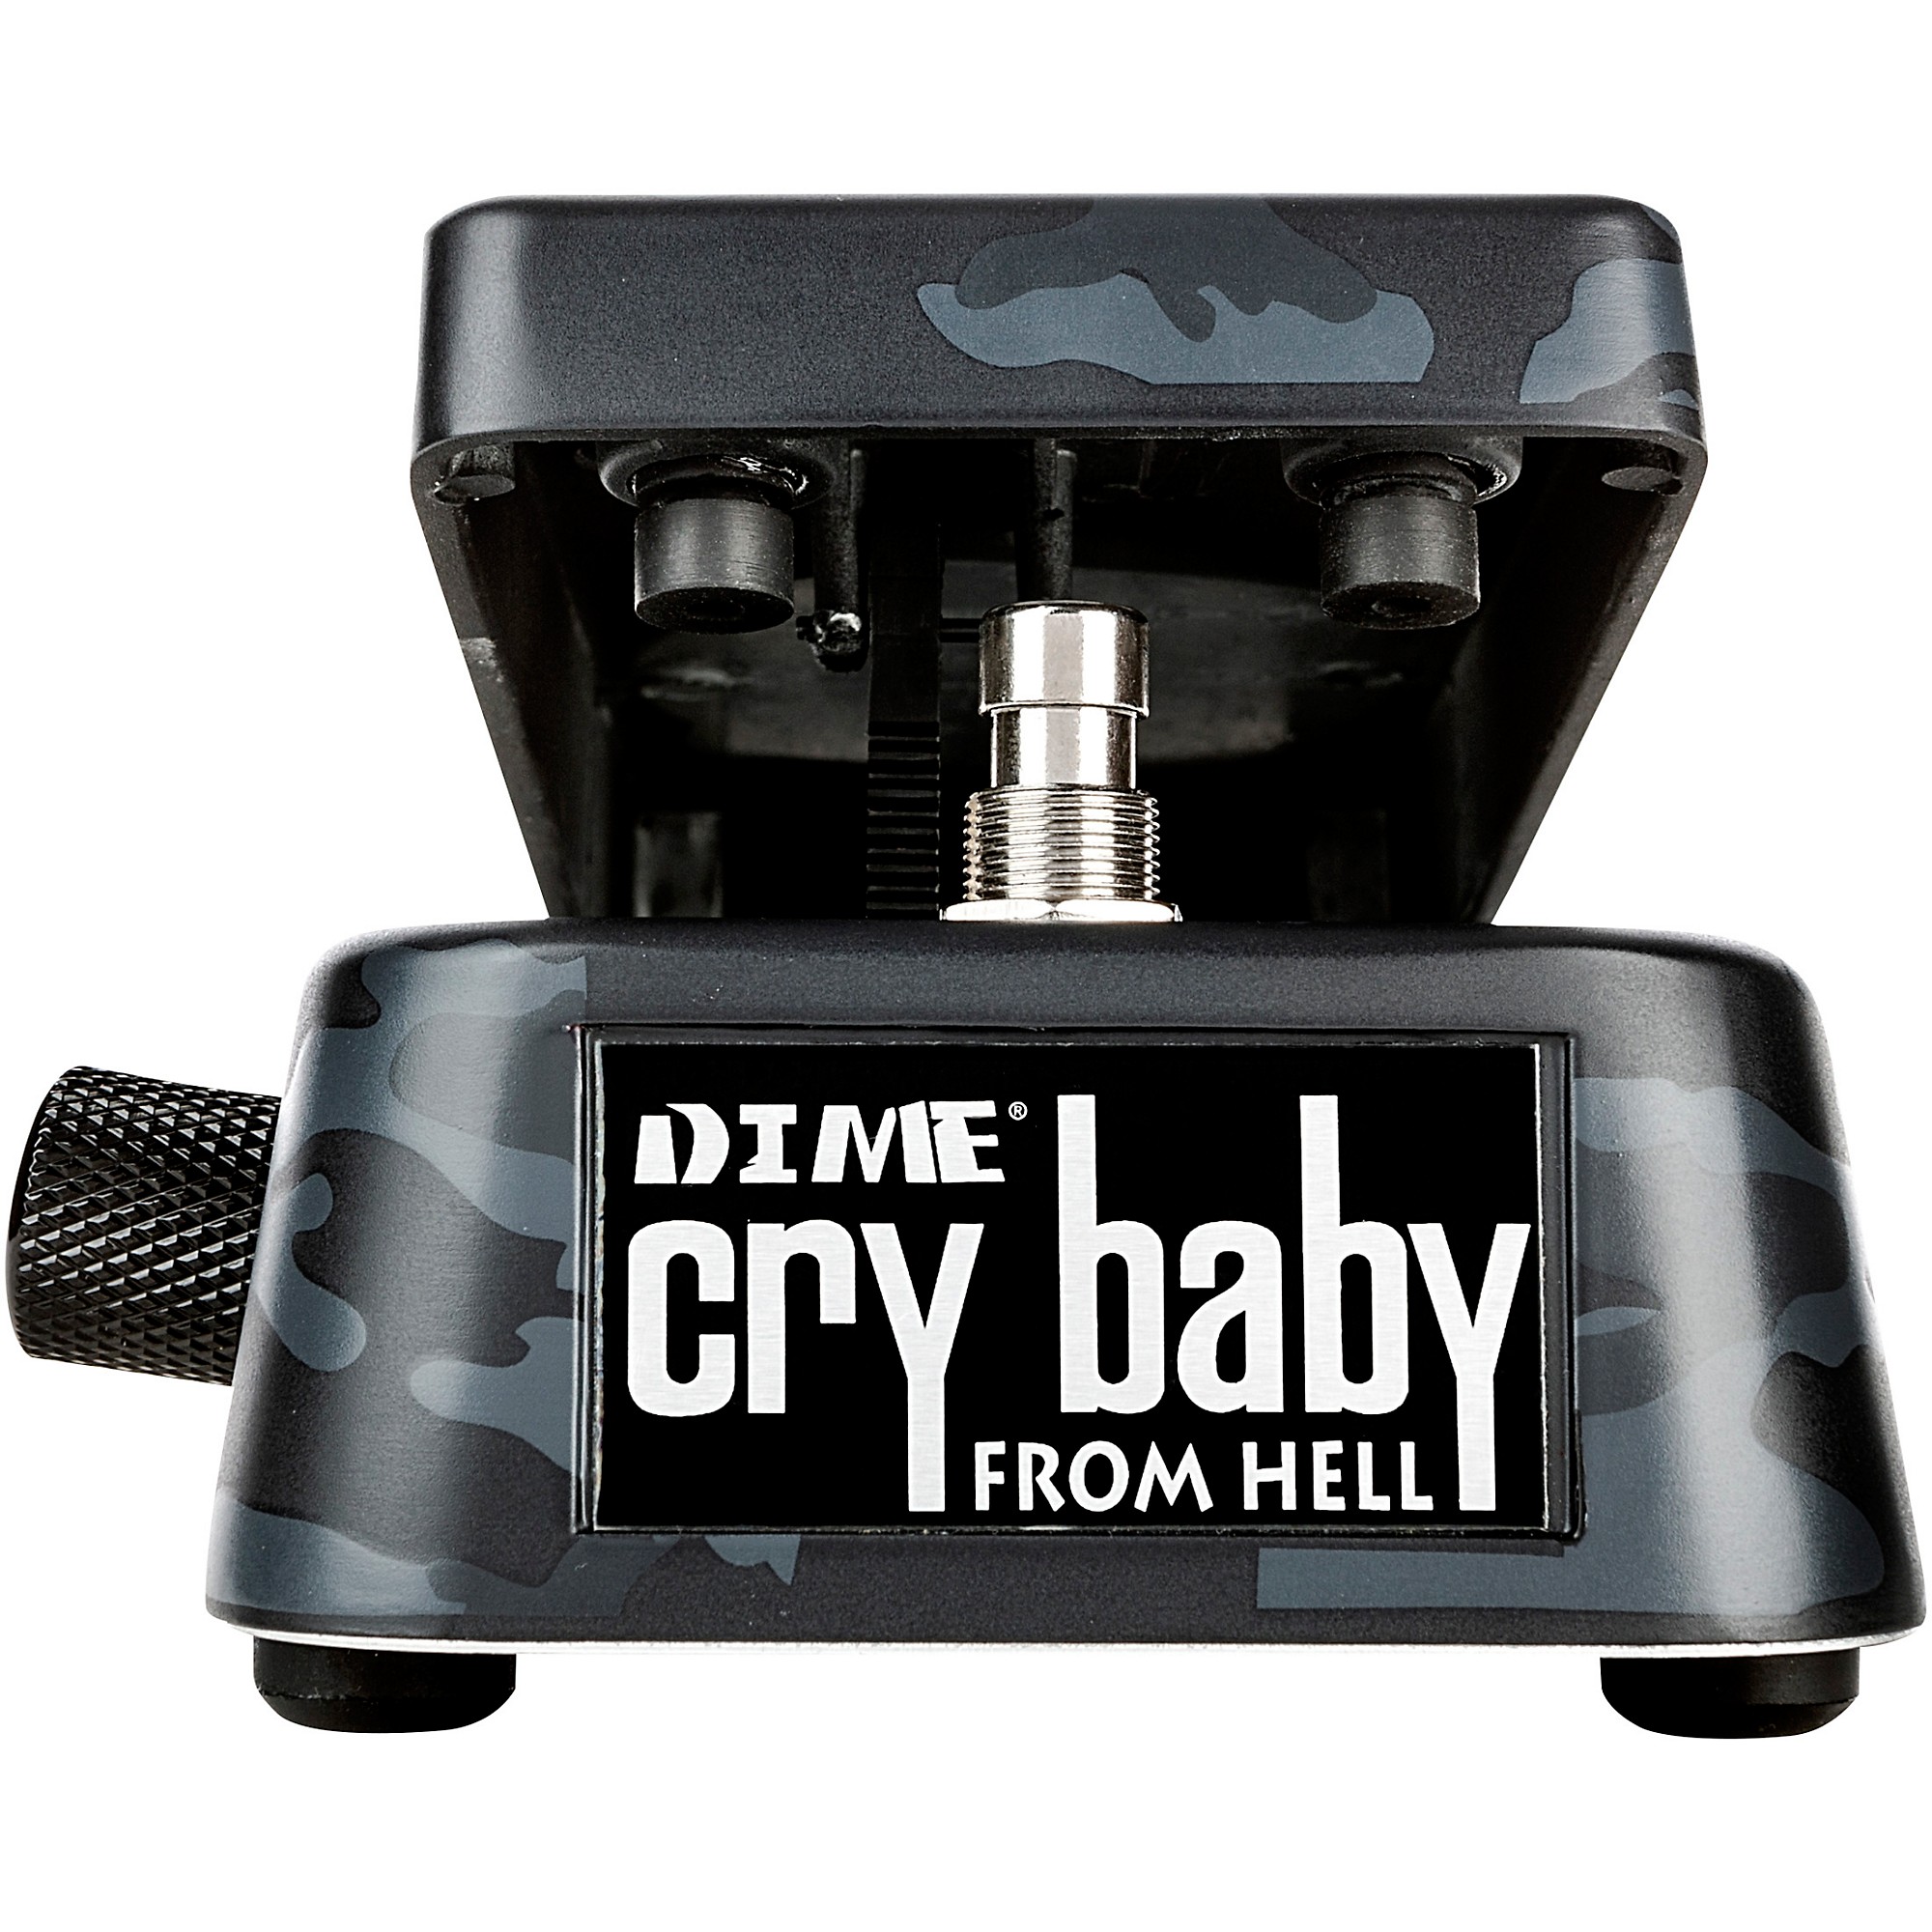 Dunlop DB01B Dimebag Cry Baby from Hell Wah Effects Pedal | Guitar ...